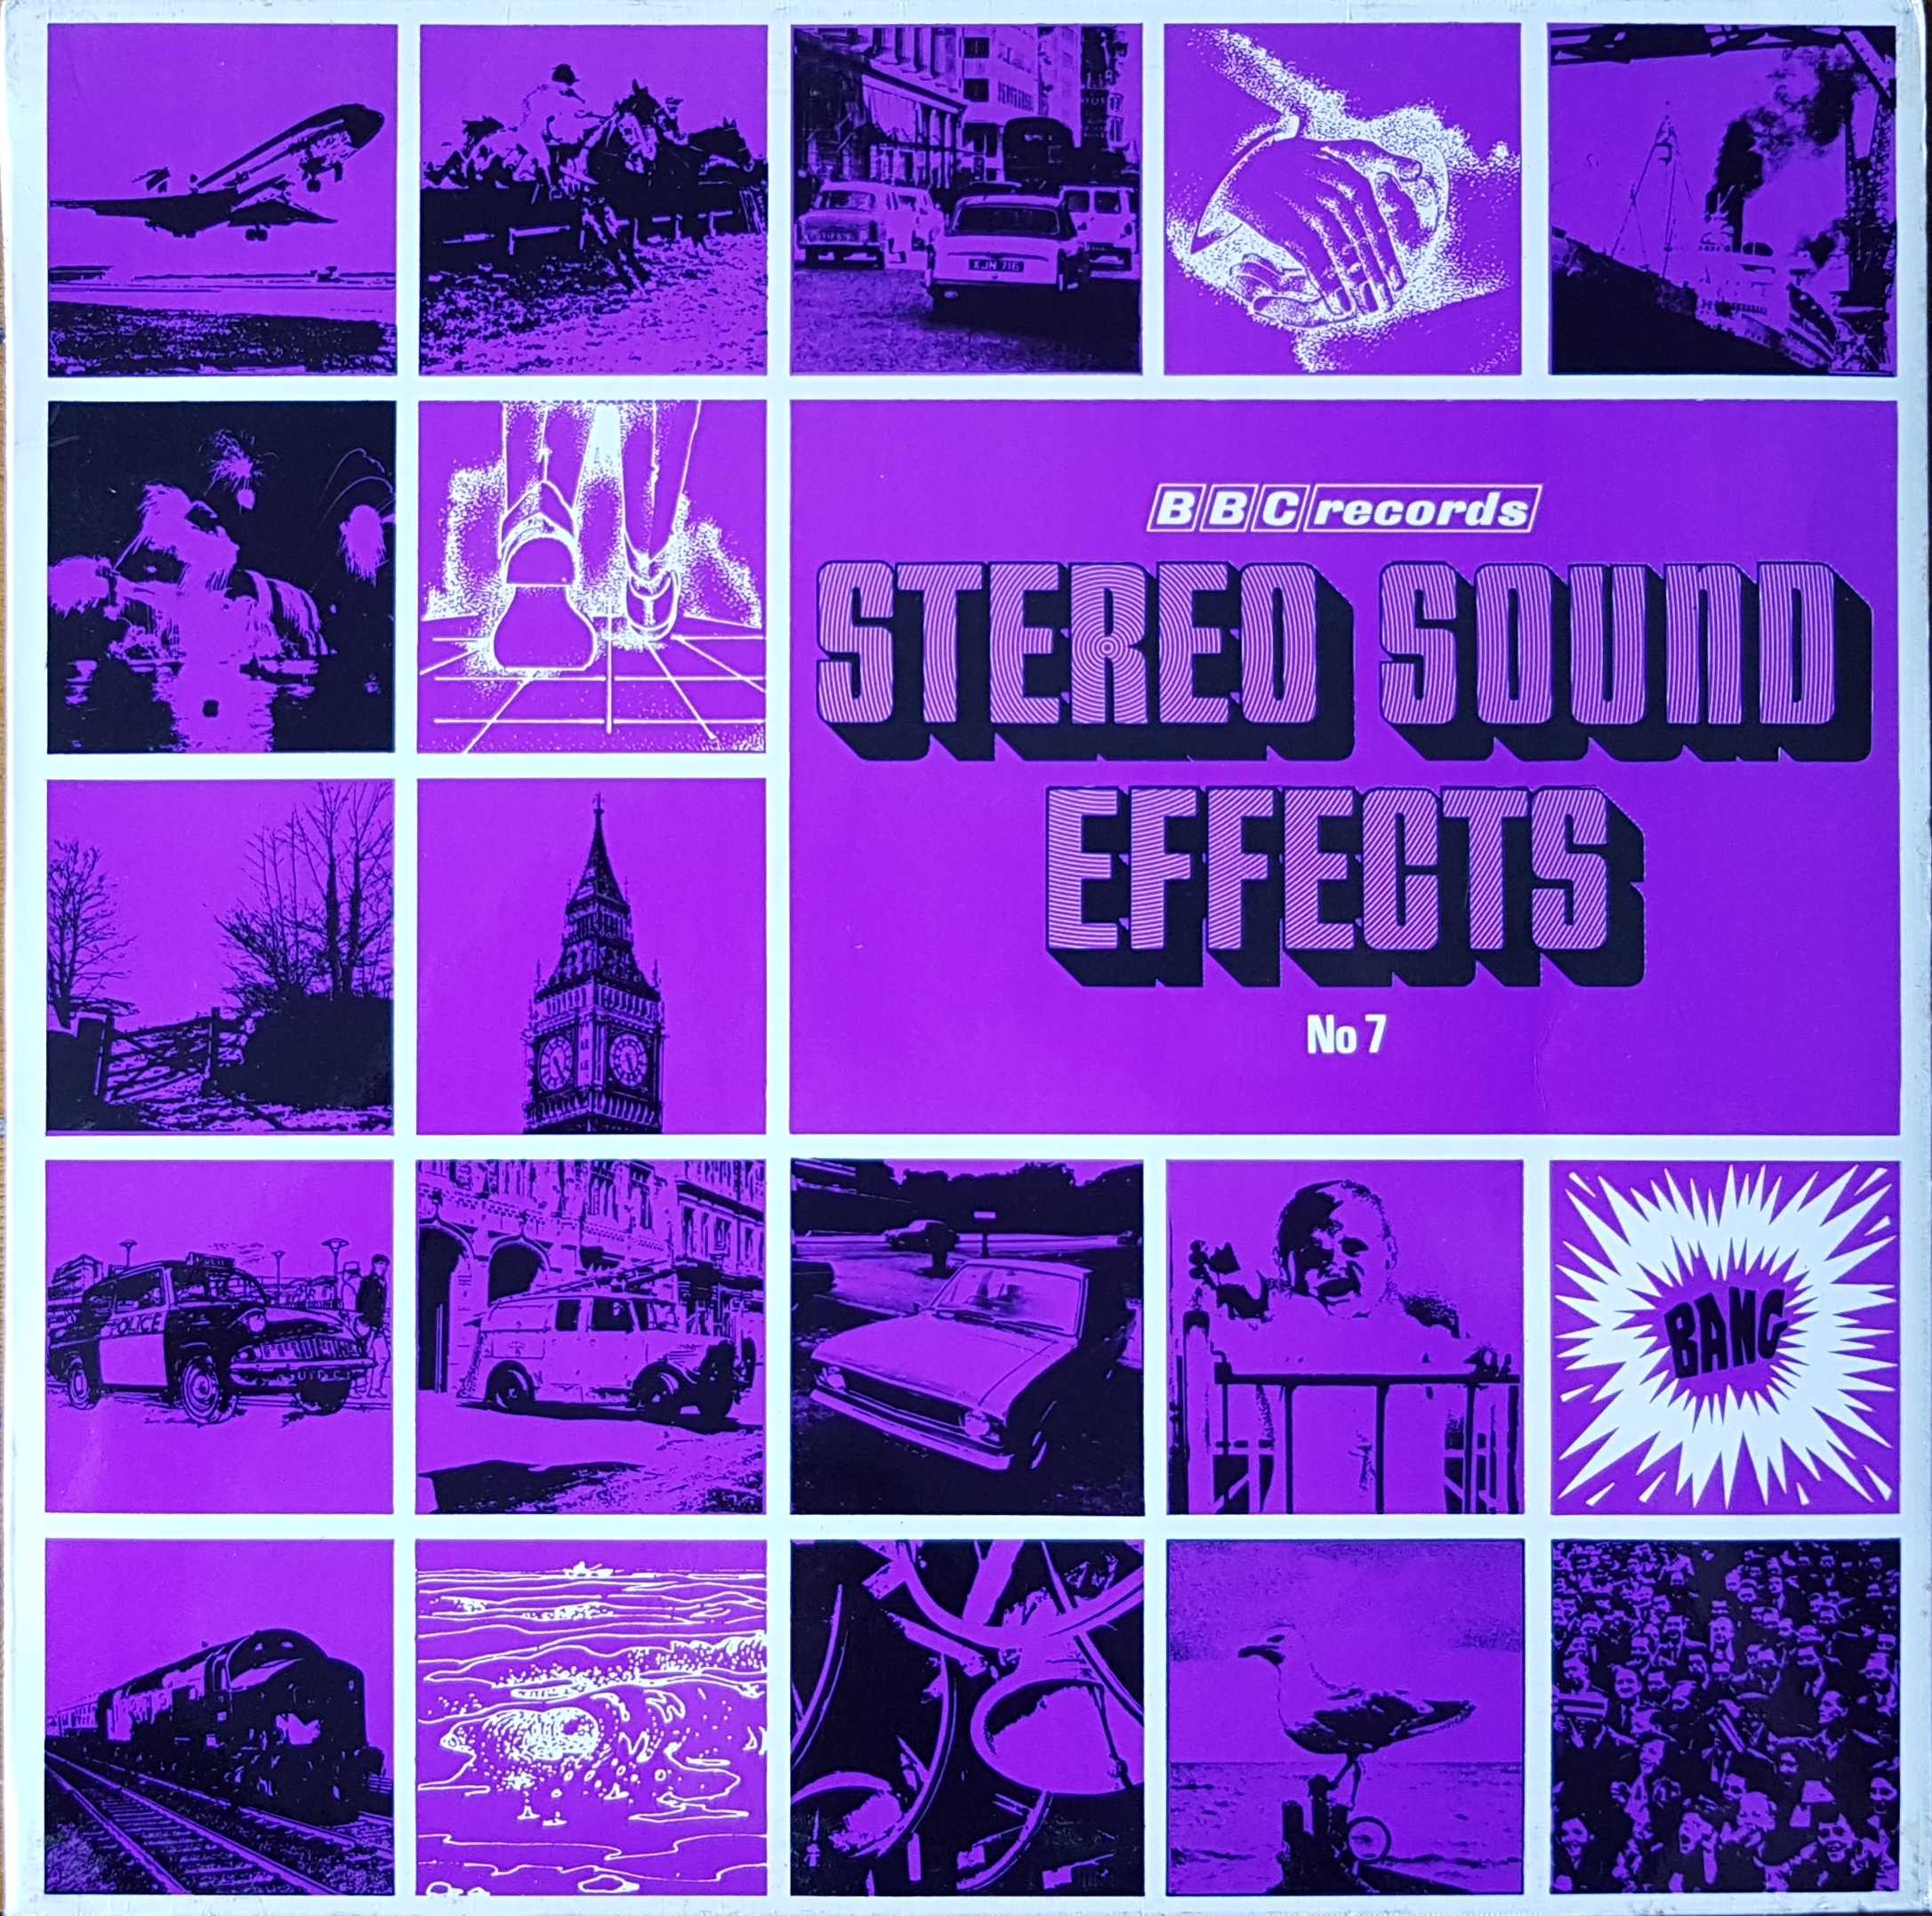 Picture of RED 113 Sound effects no. 7 by artist Various from the BBC albums - Records and Tapes library